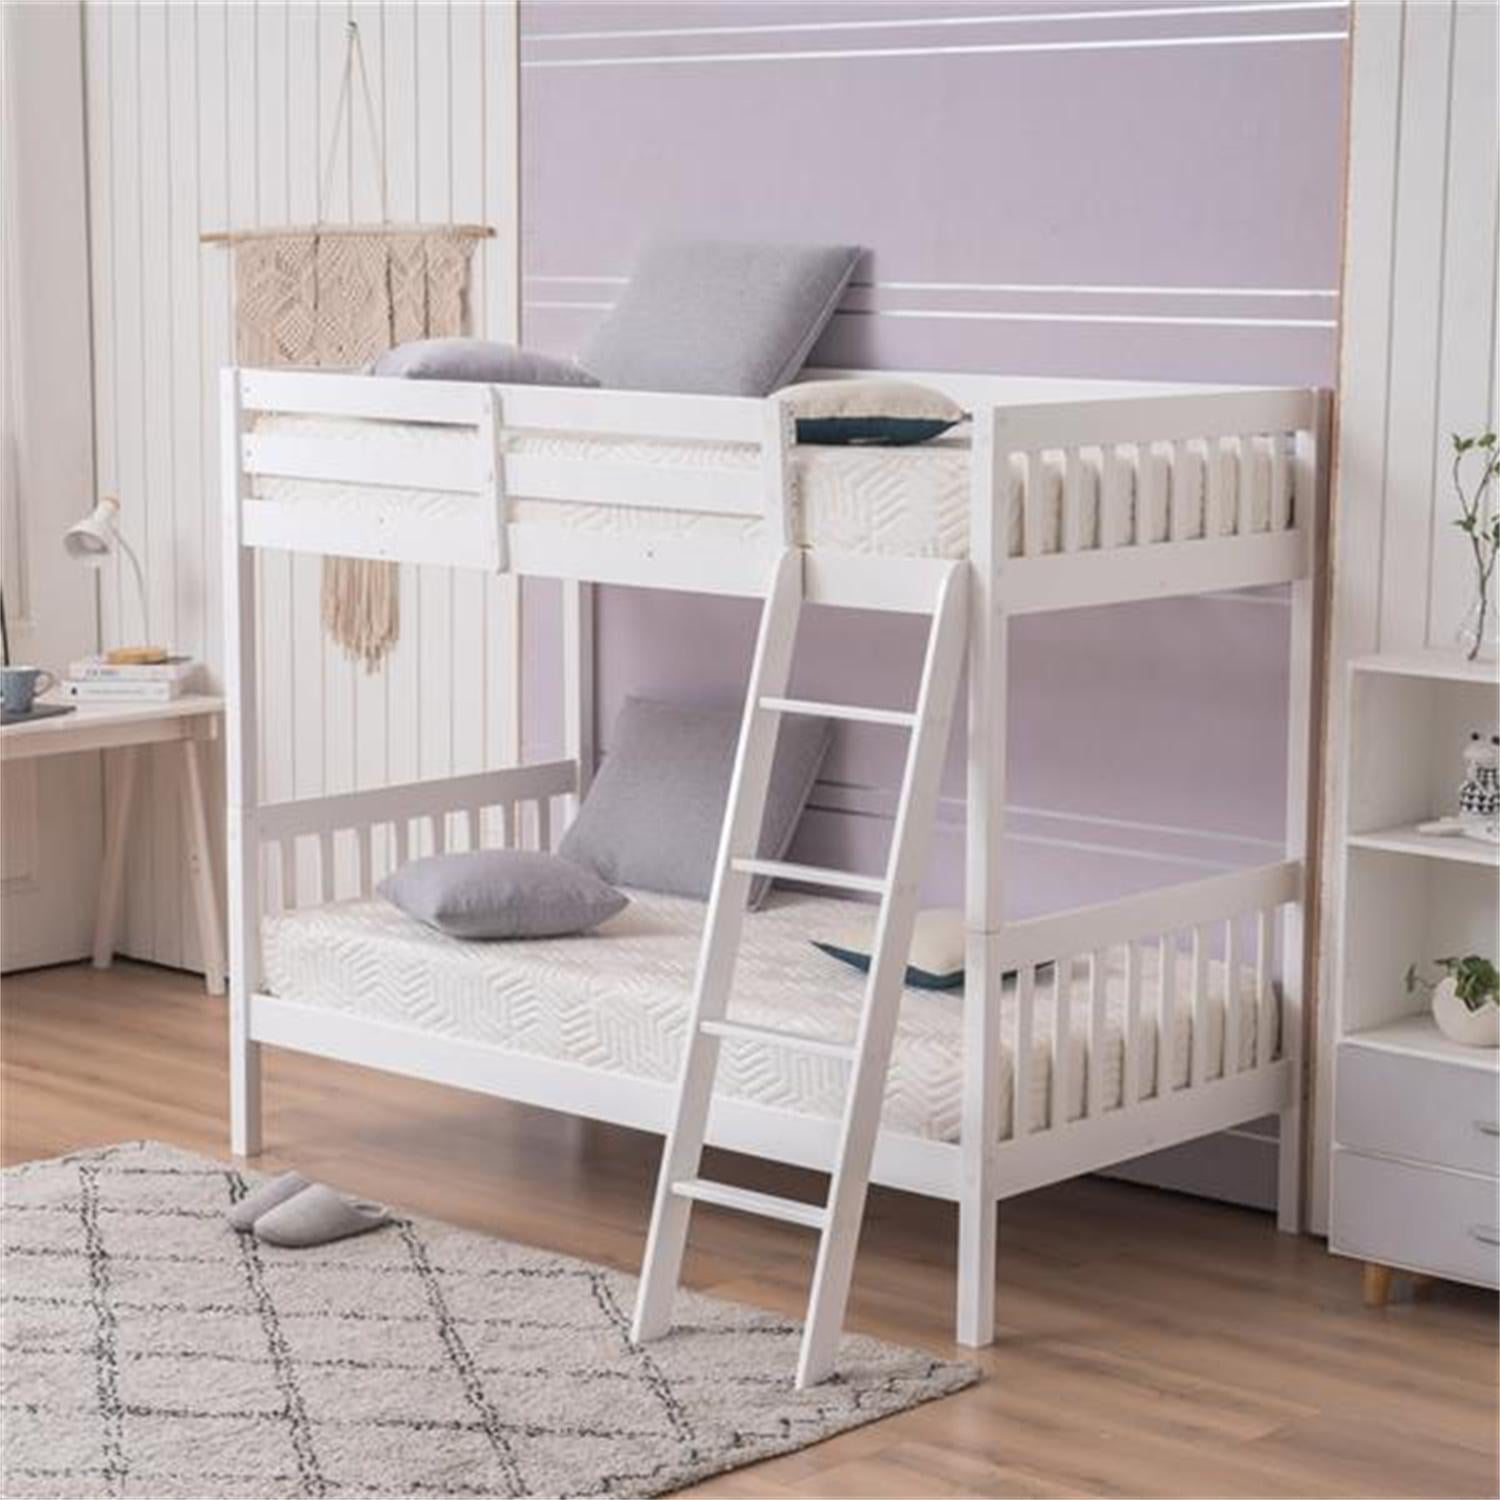 Bunk Beds With Safety Barrier, Bunk Bed Ladder Cover Barrier